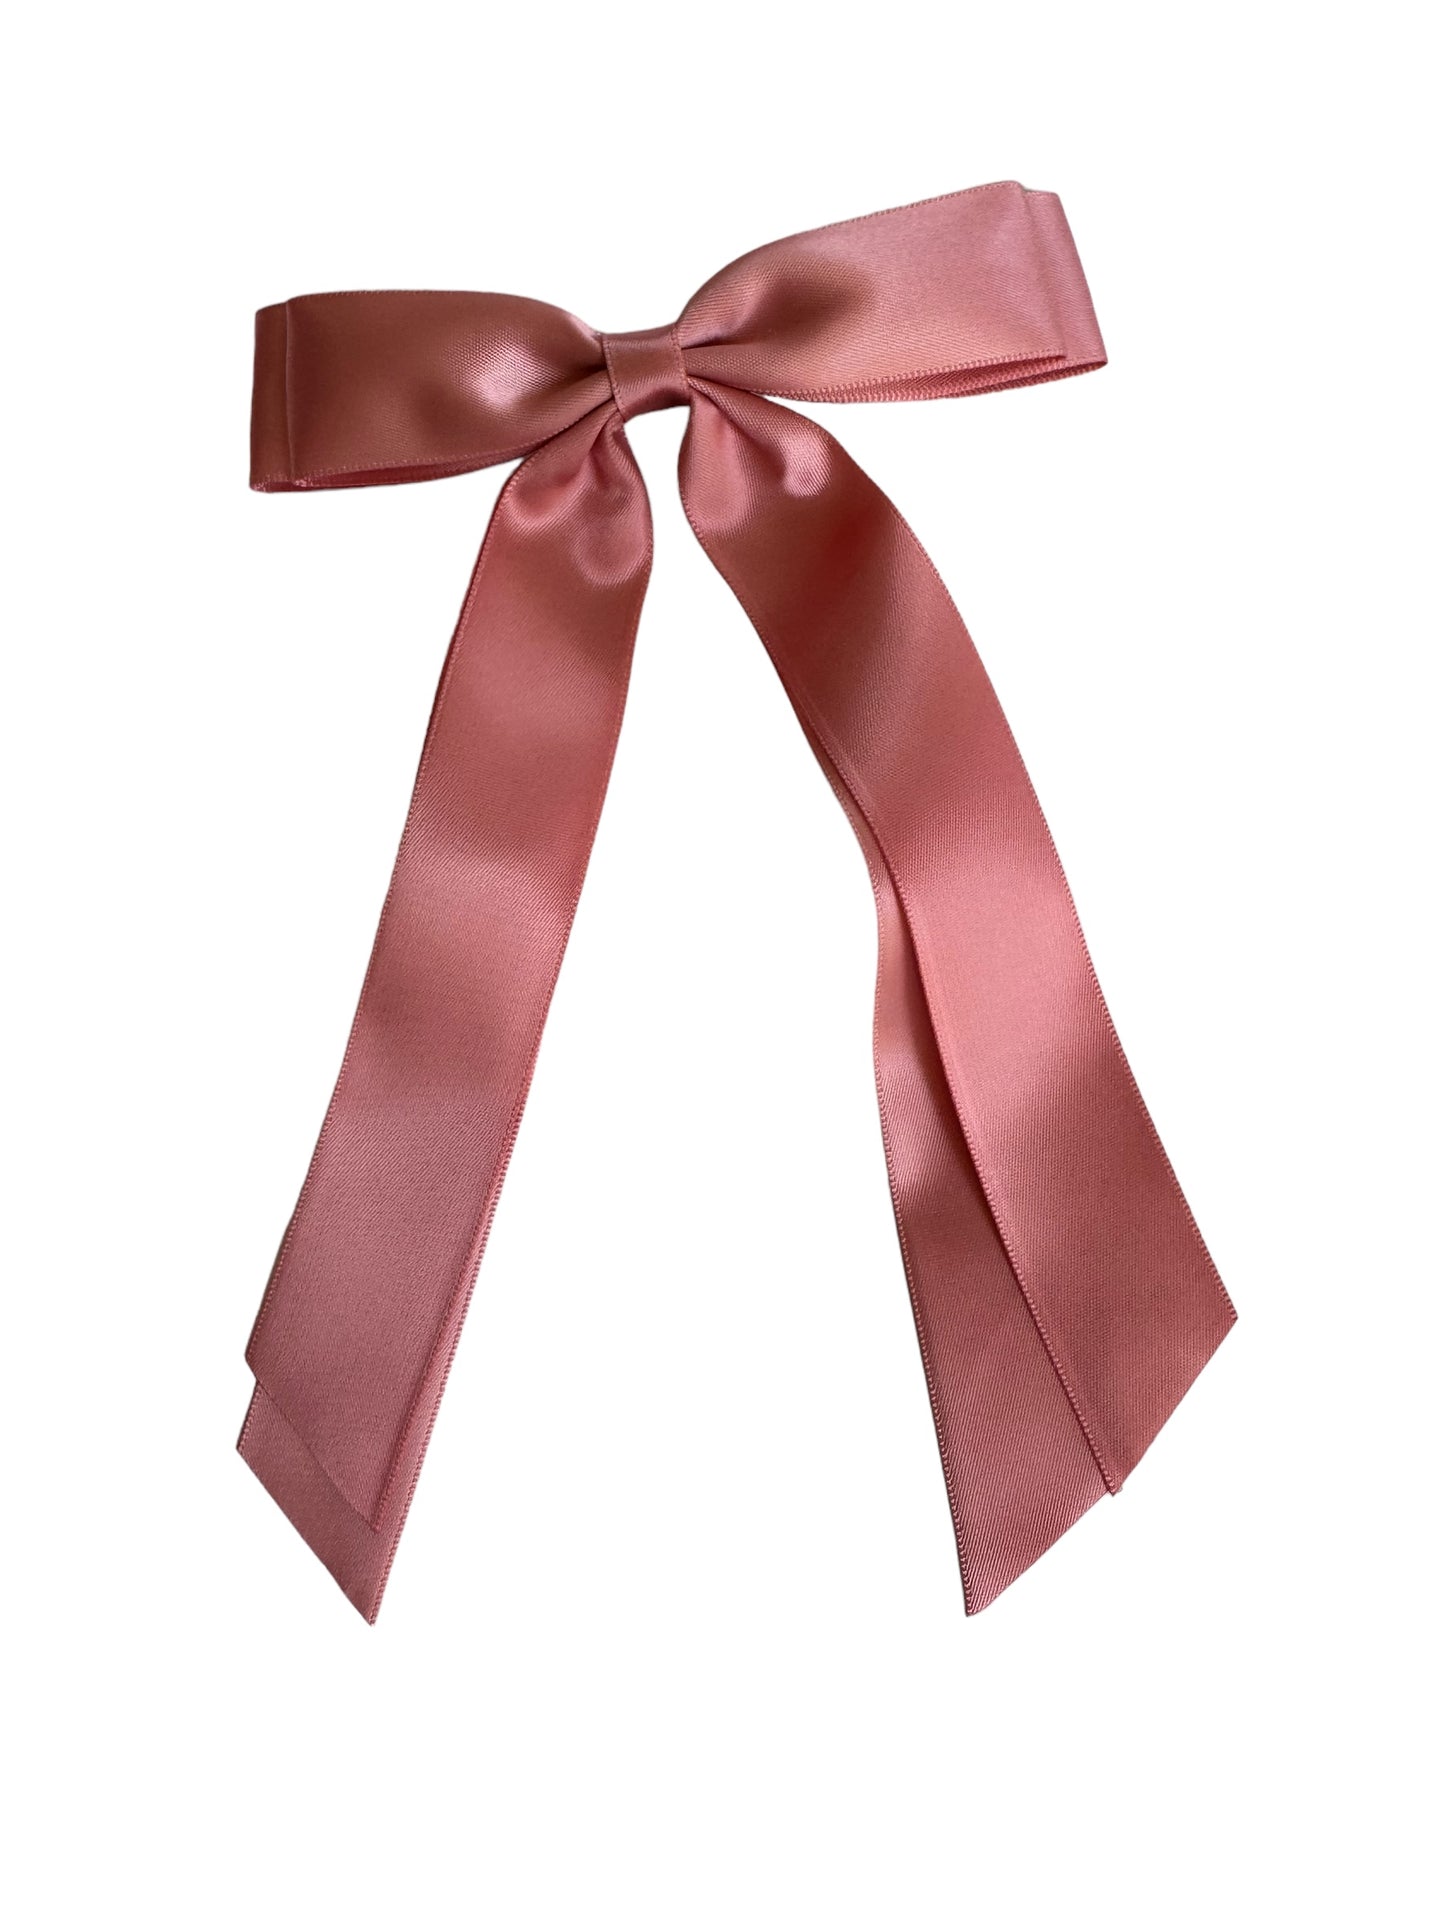 Pink Double Streamer Satin Hair Bow